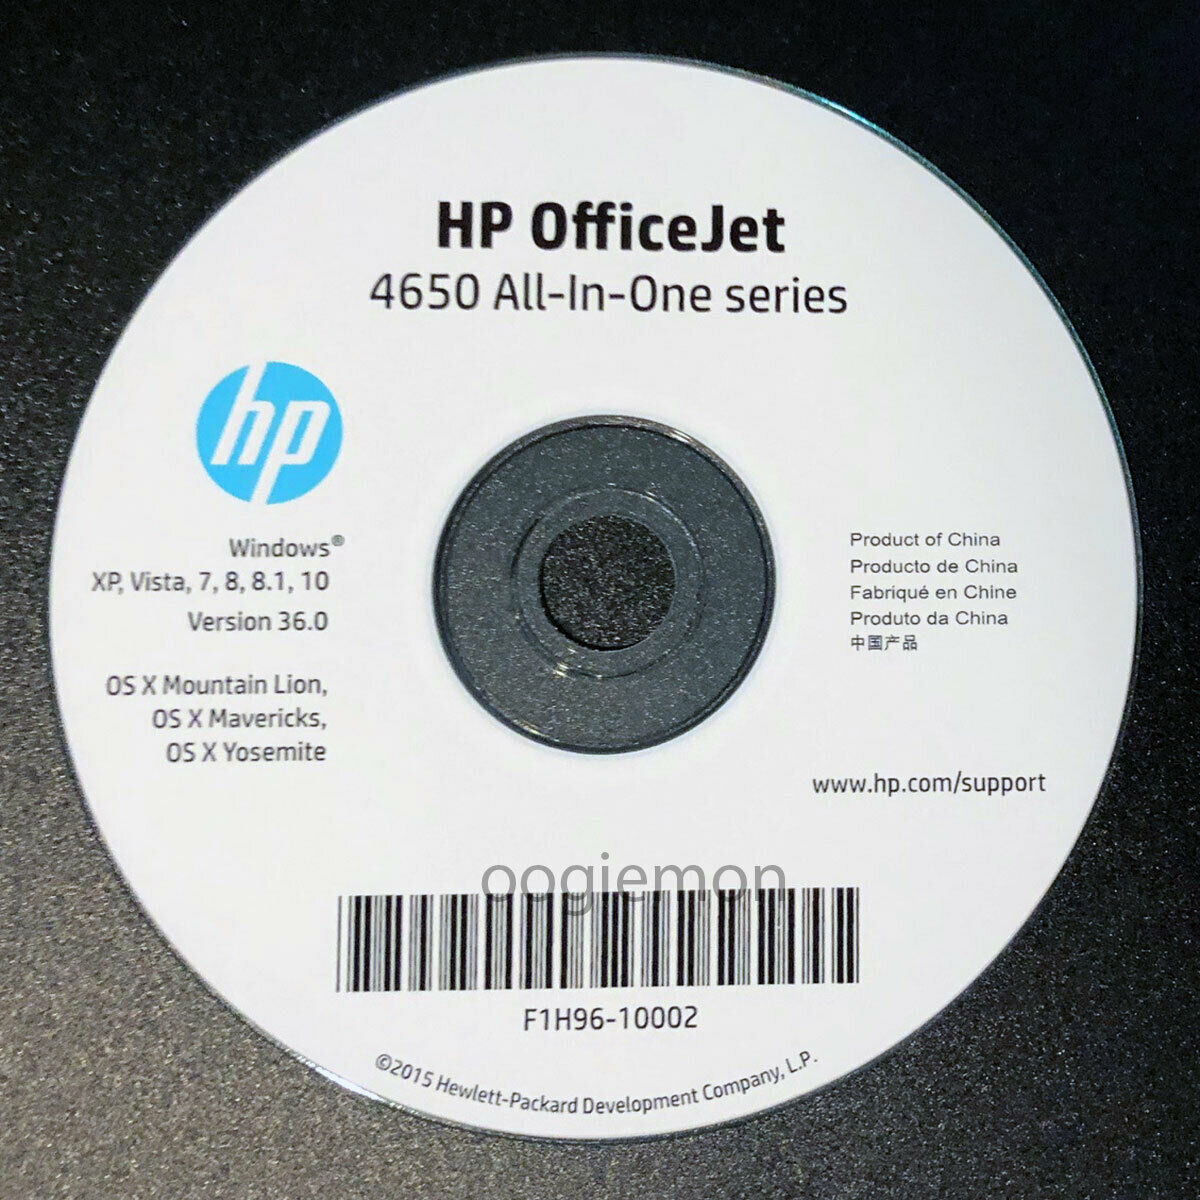 Setup Cd Rom For Hp Officejet 4650 All-in-one Series Software For Windows / Mac